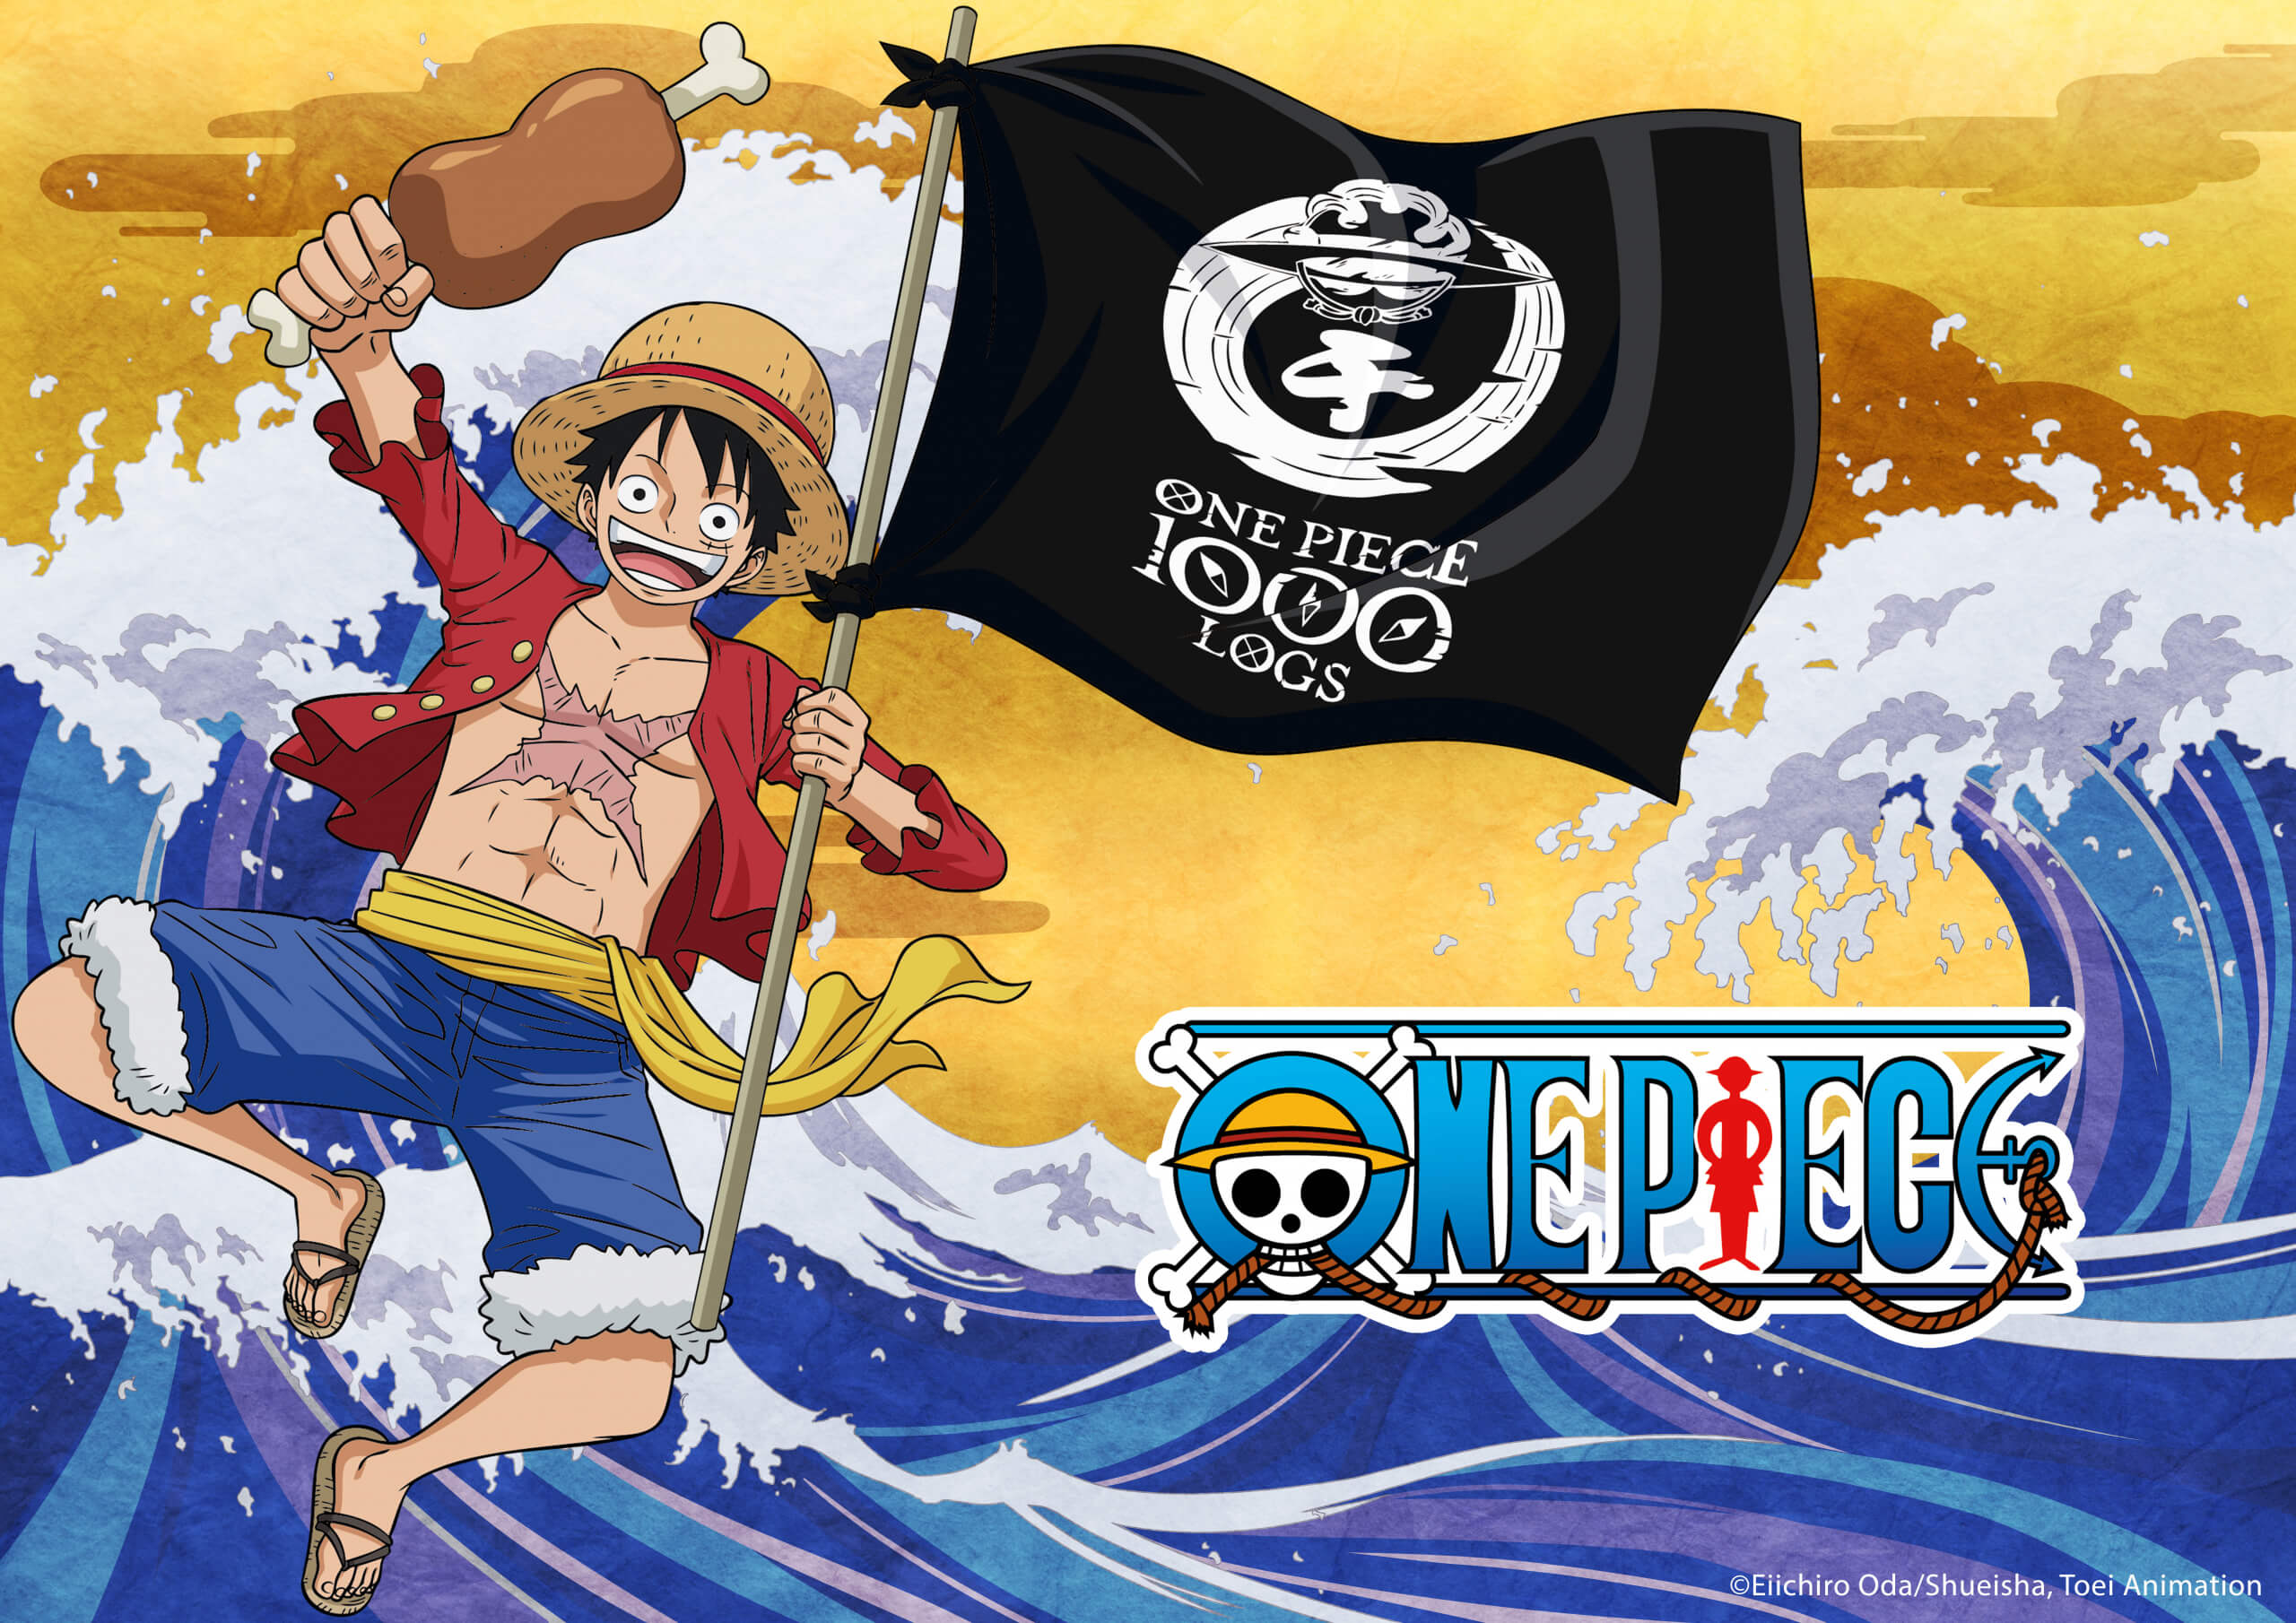 One Piece episode 1000: Release and official trailer is out